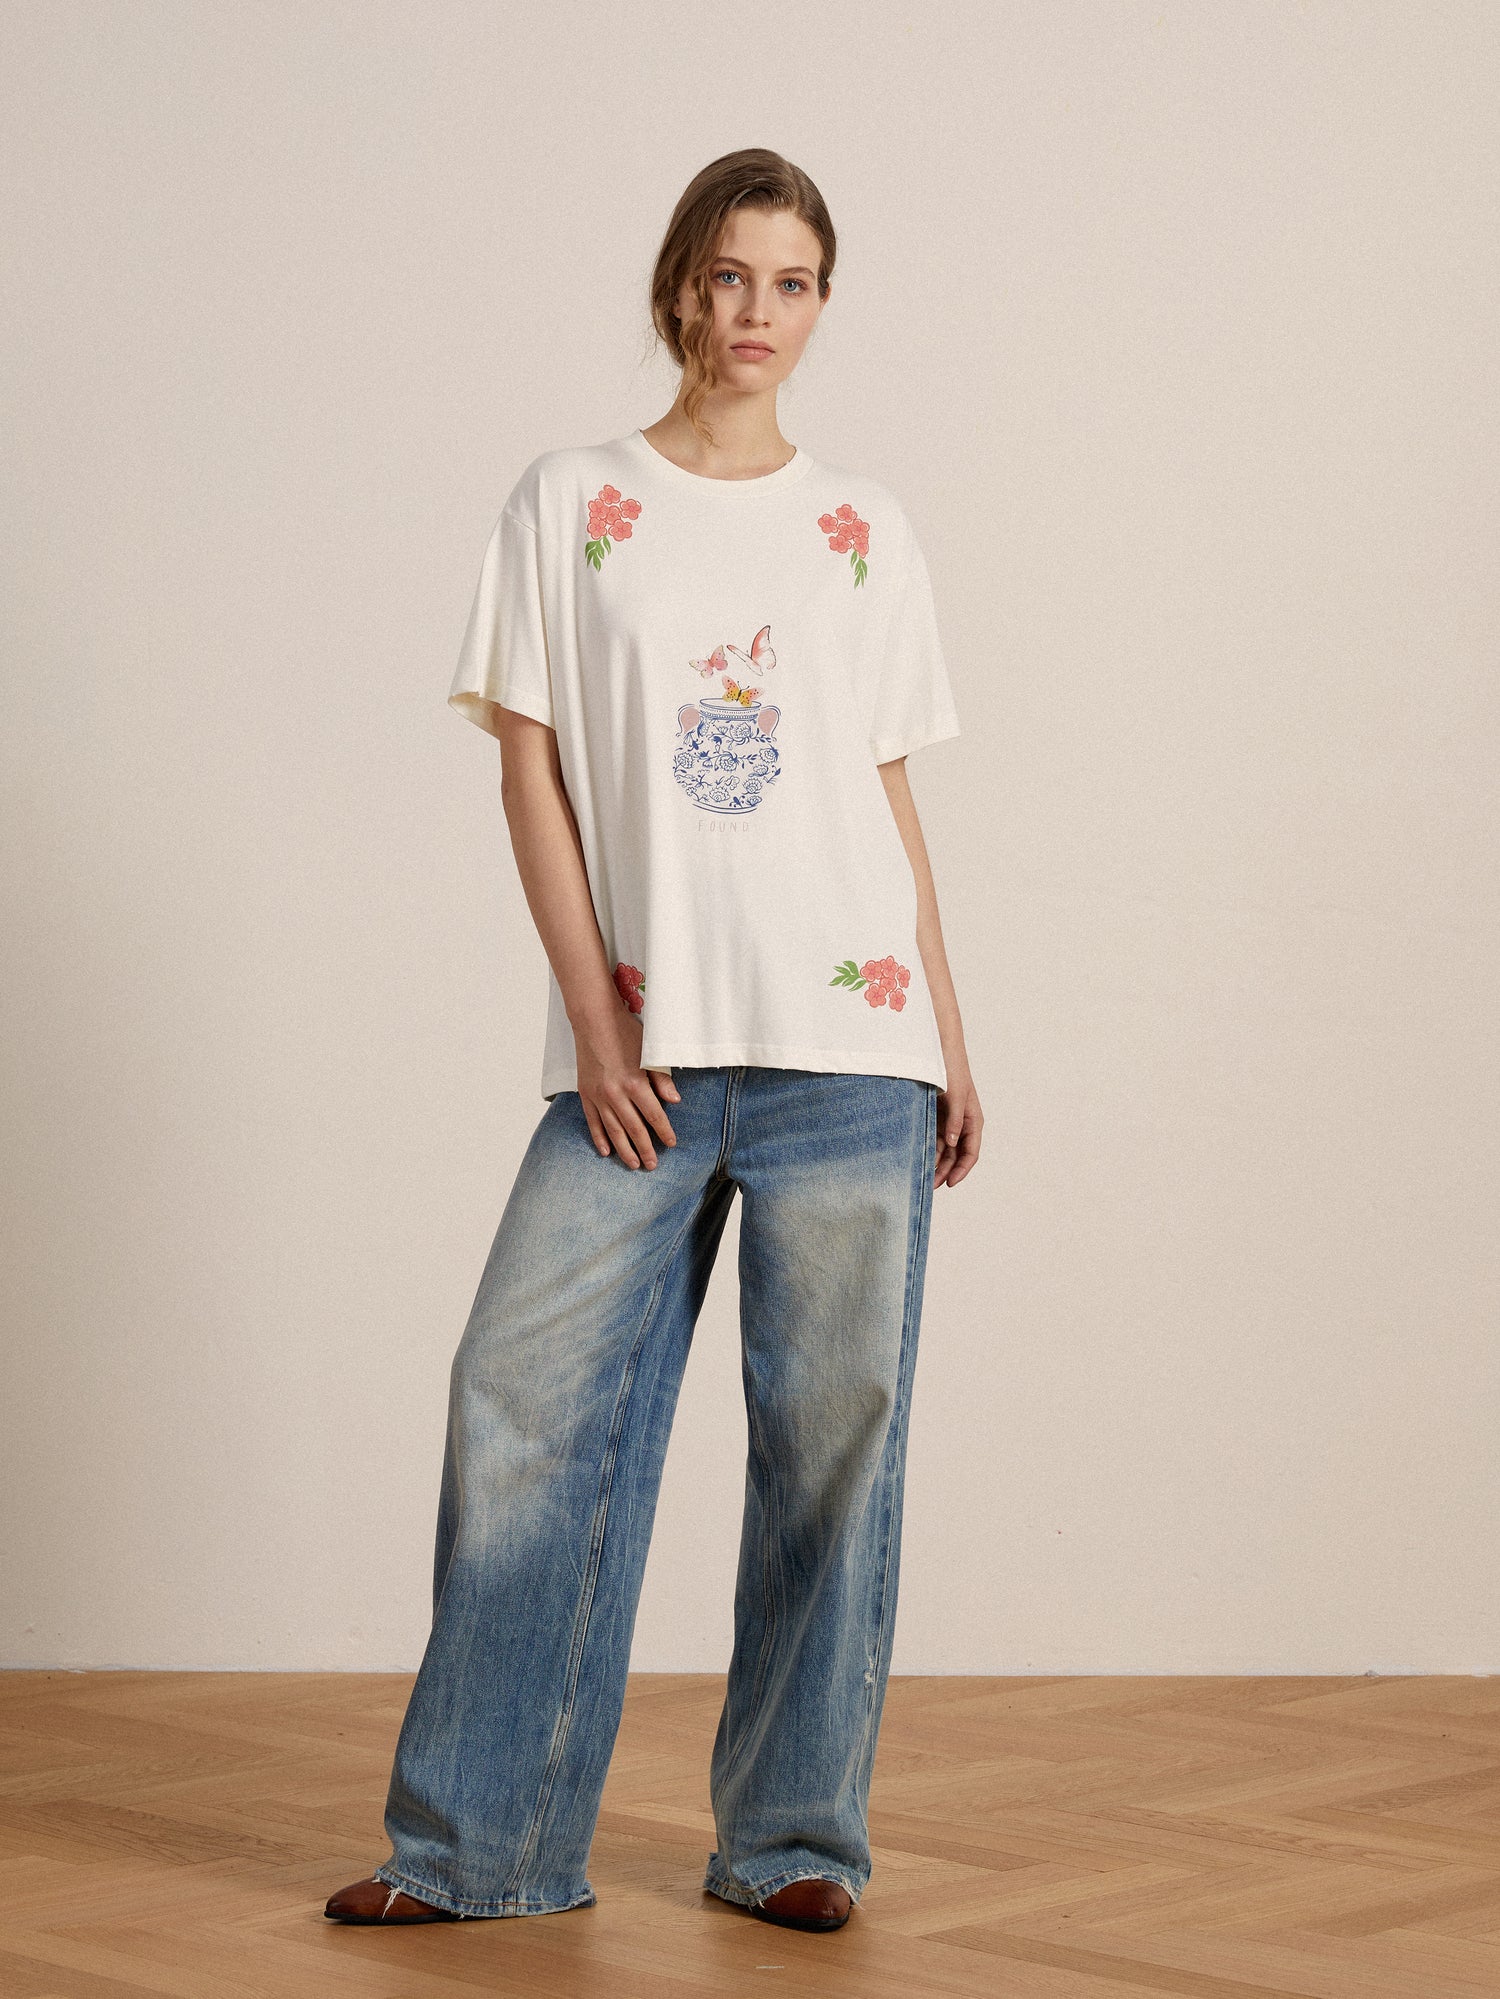 A woman wearing an embroidered Found Flower Pot Tee and jeans.